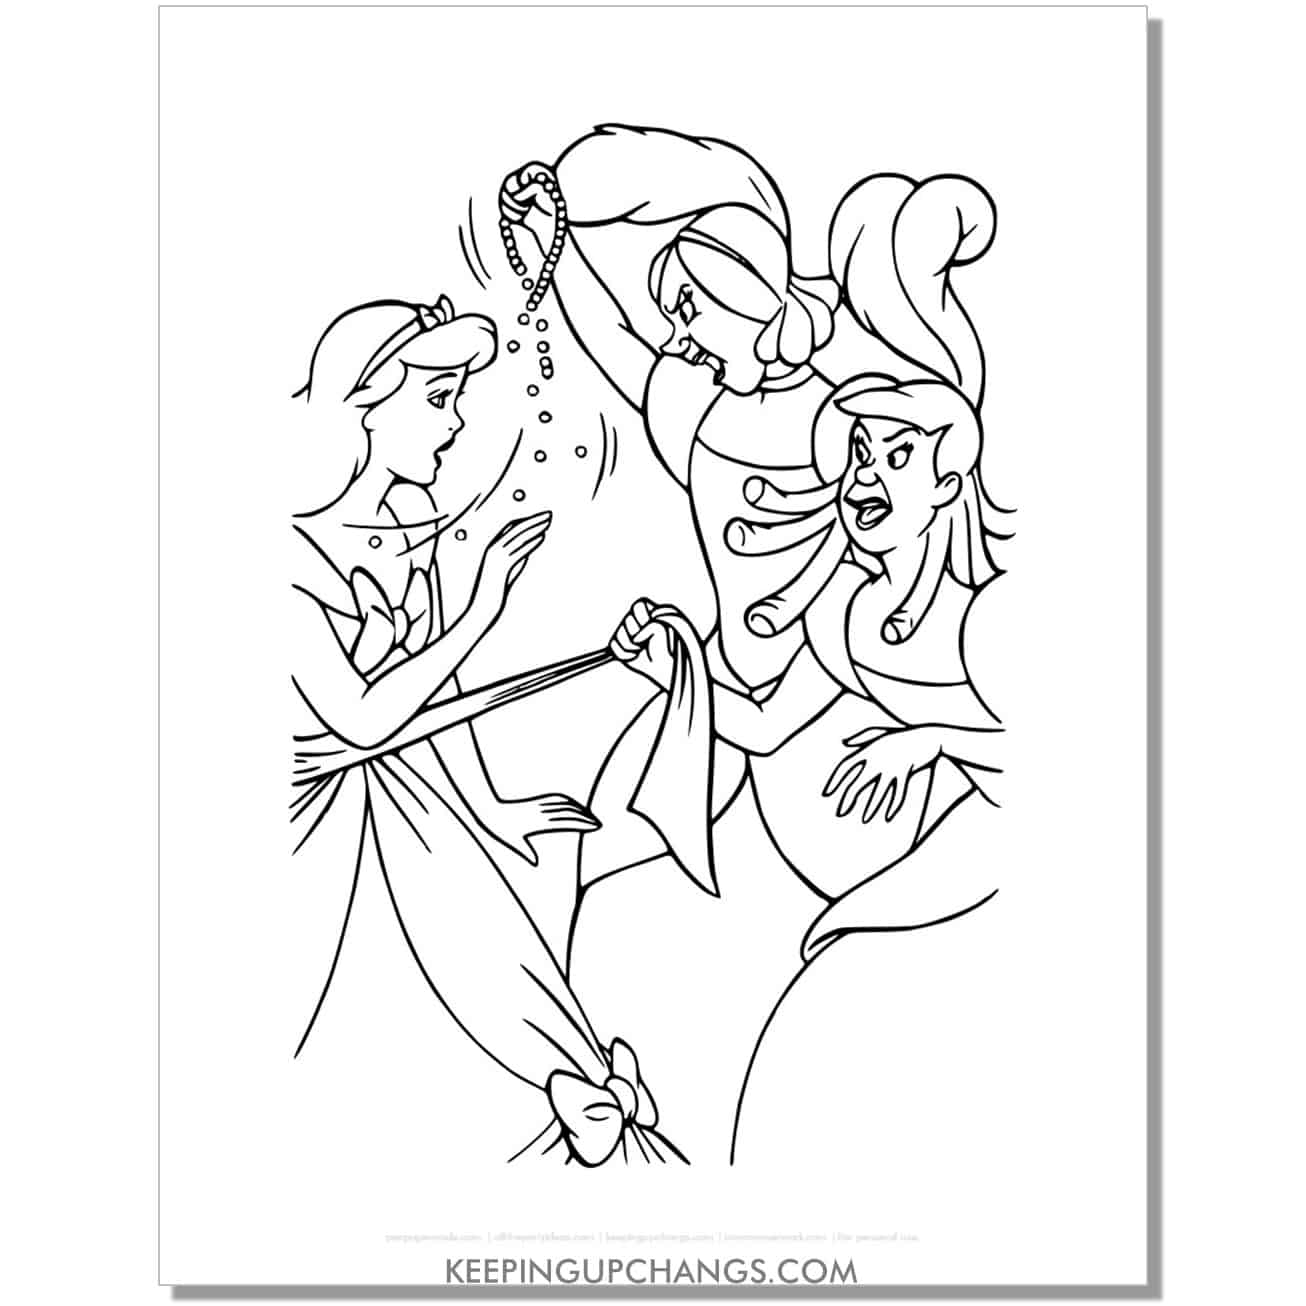 cinderella bullied by evil stepsisters coloring page, sheet.